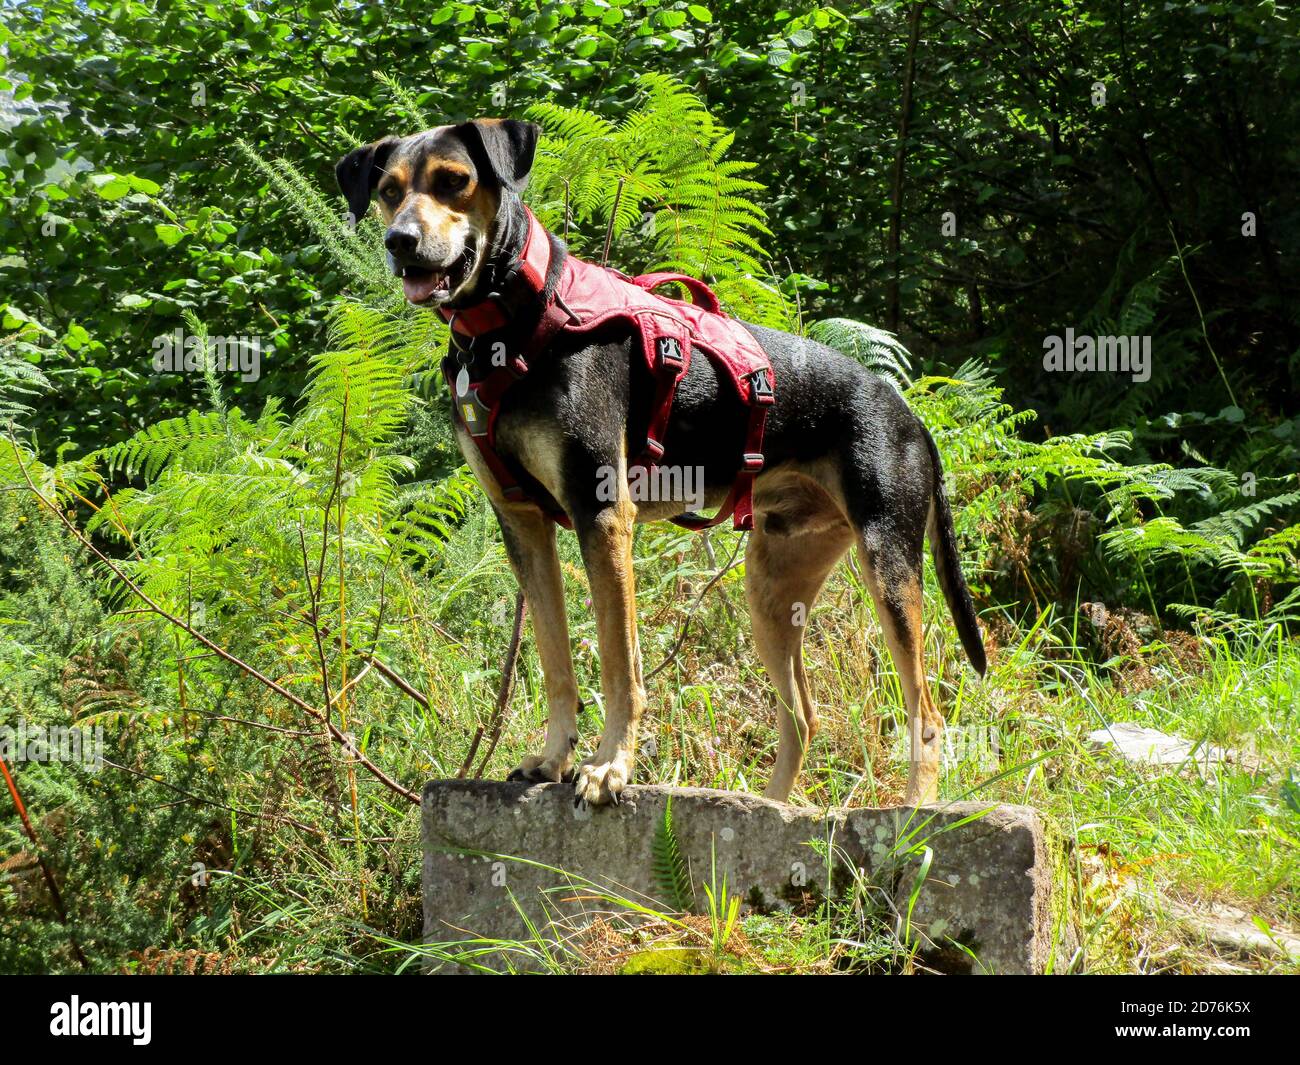 Shot of a cute dog standing in nature Stock Photo